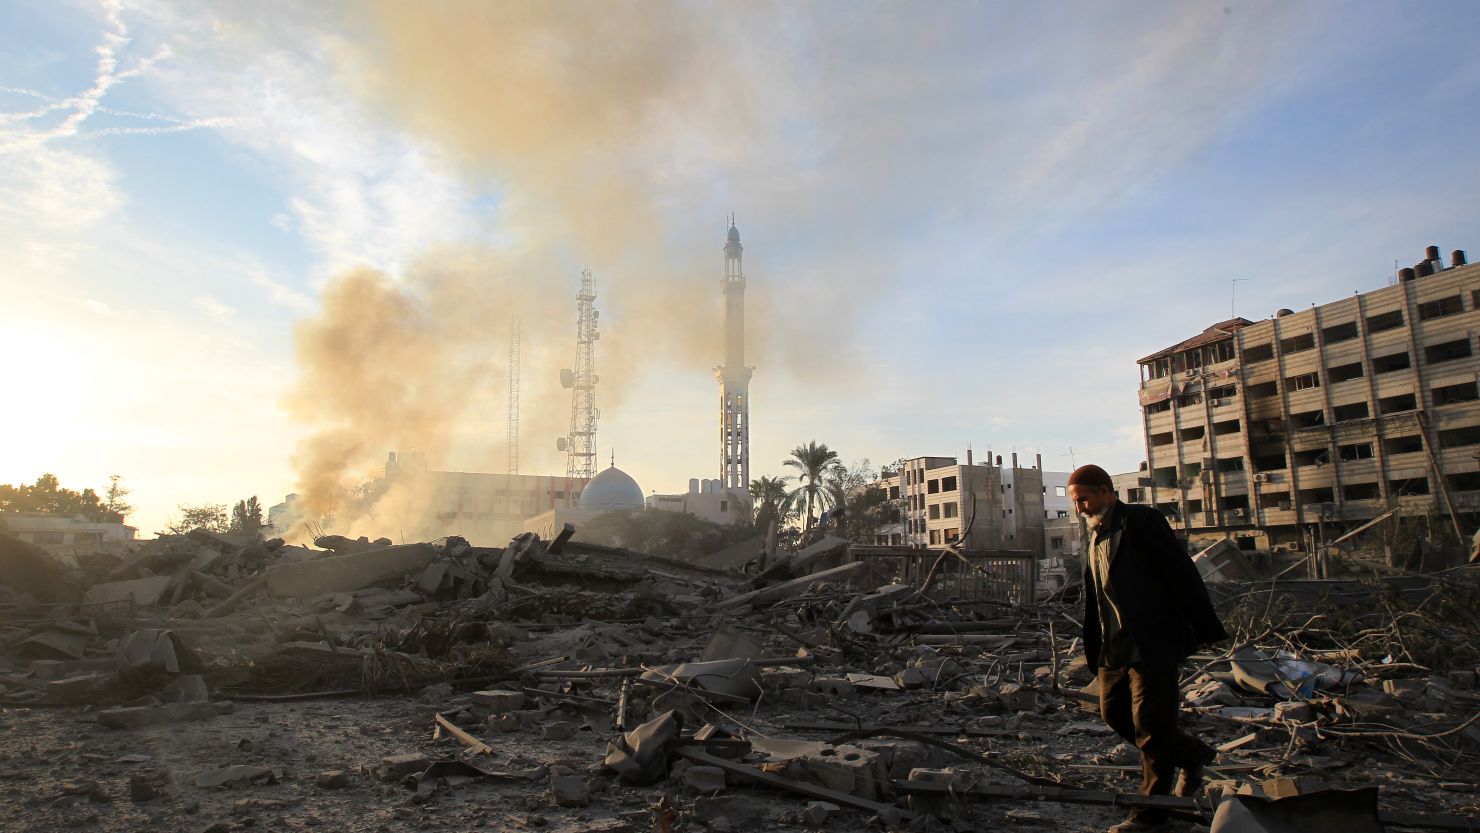 A Palestinian man walks amidst debris at the destroyed compound of the the internal security ministry in Gaza